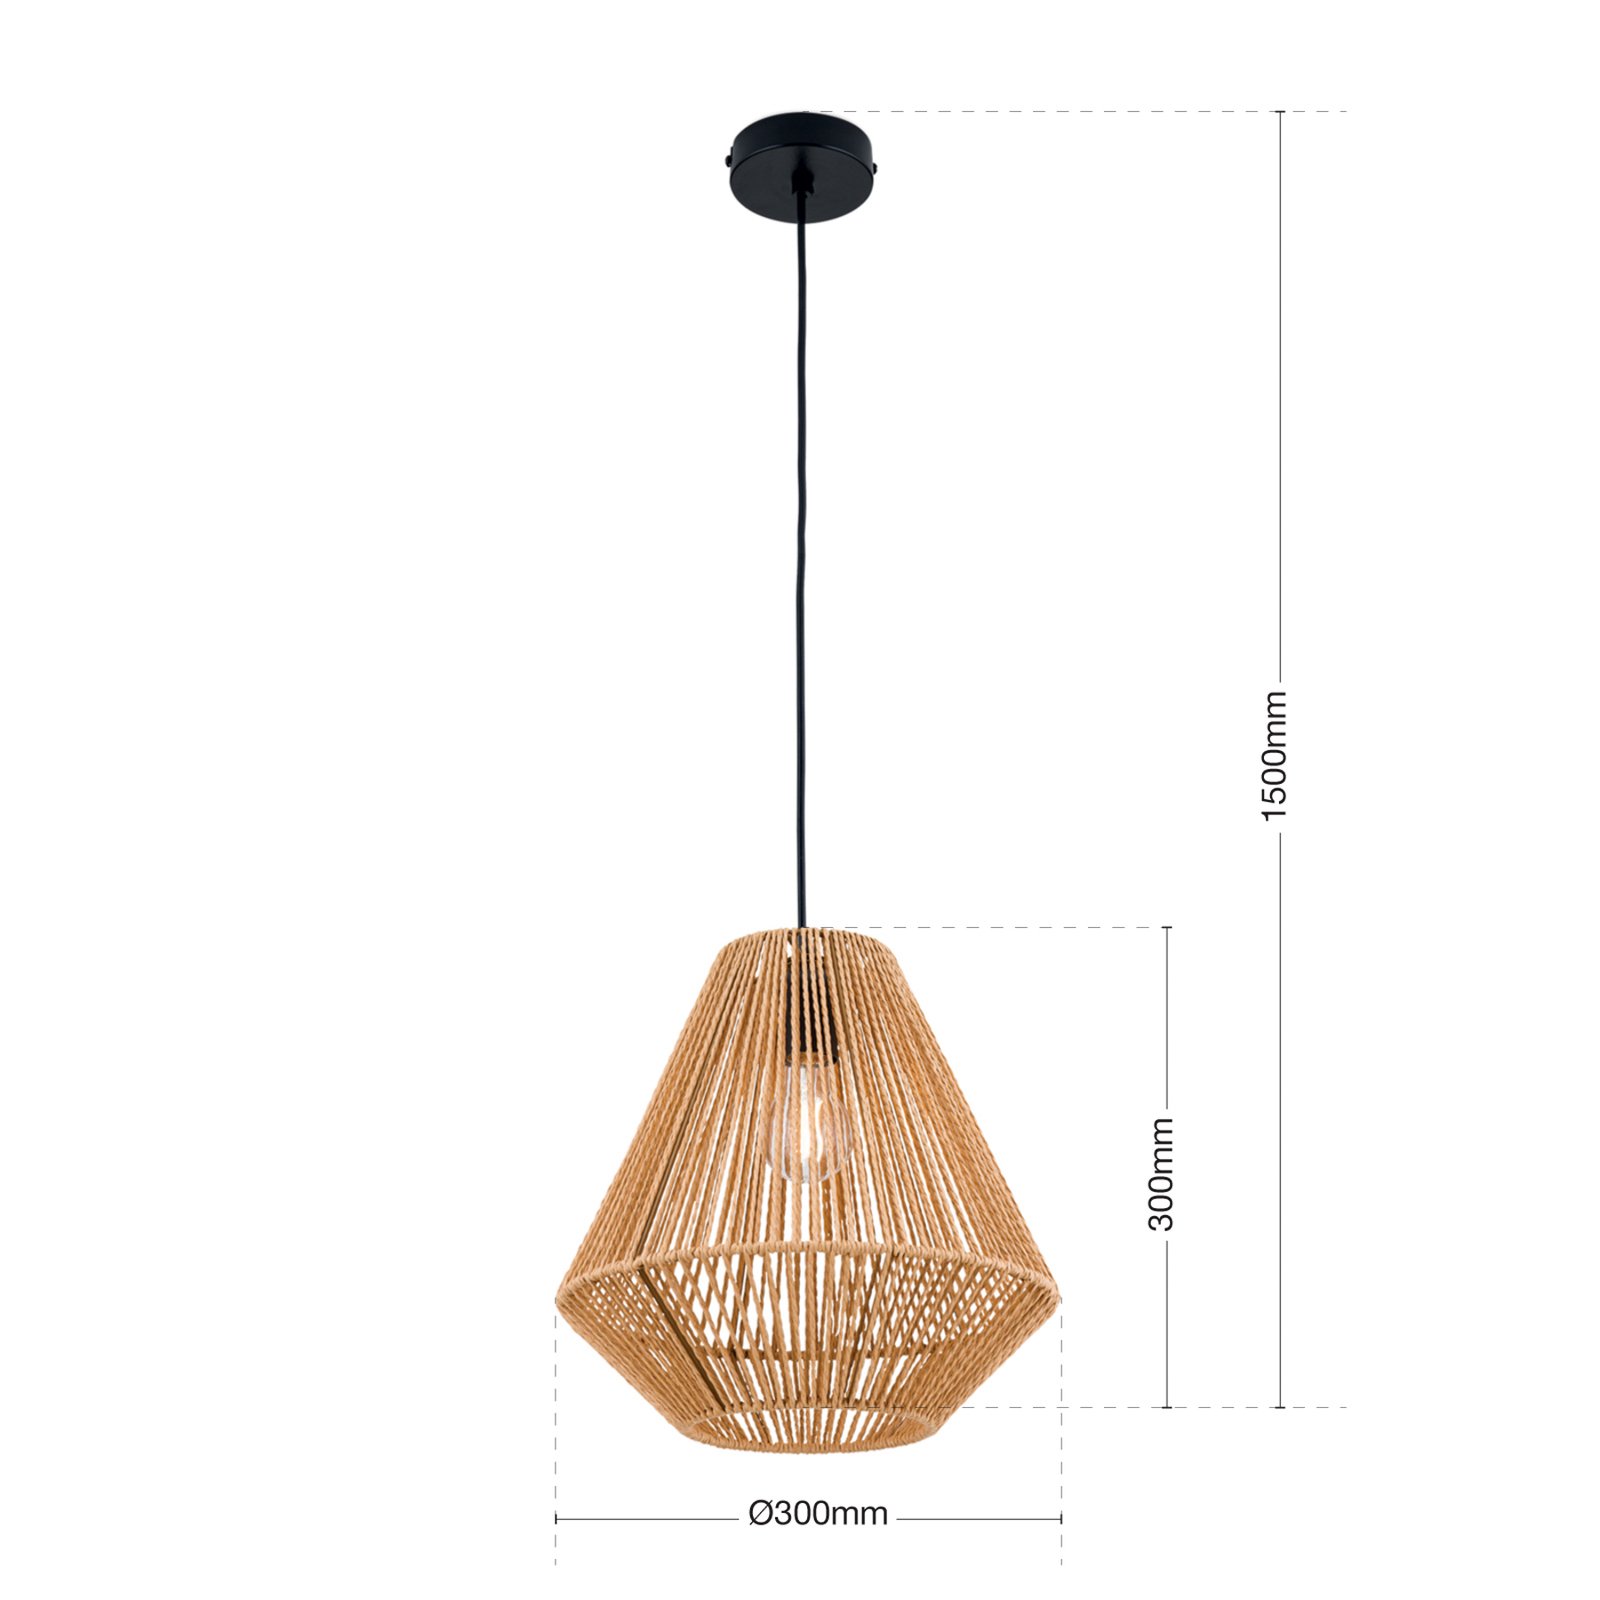 Jungle pendant light with a lampshade of hemp cord